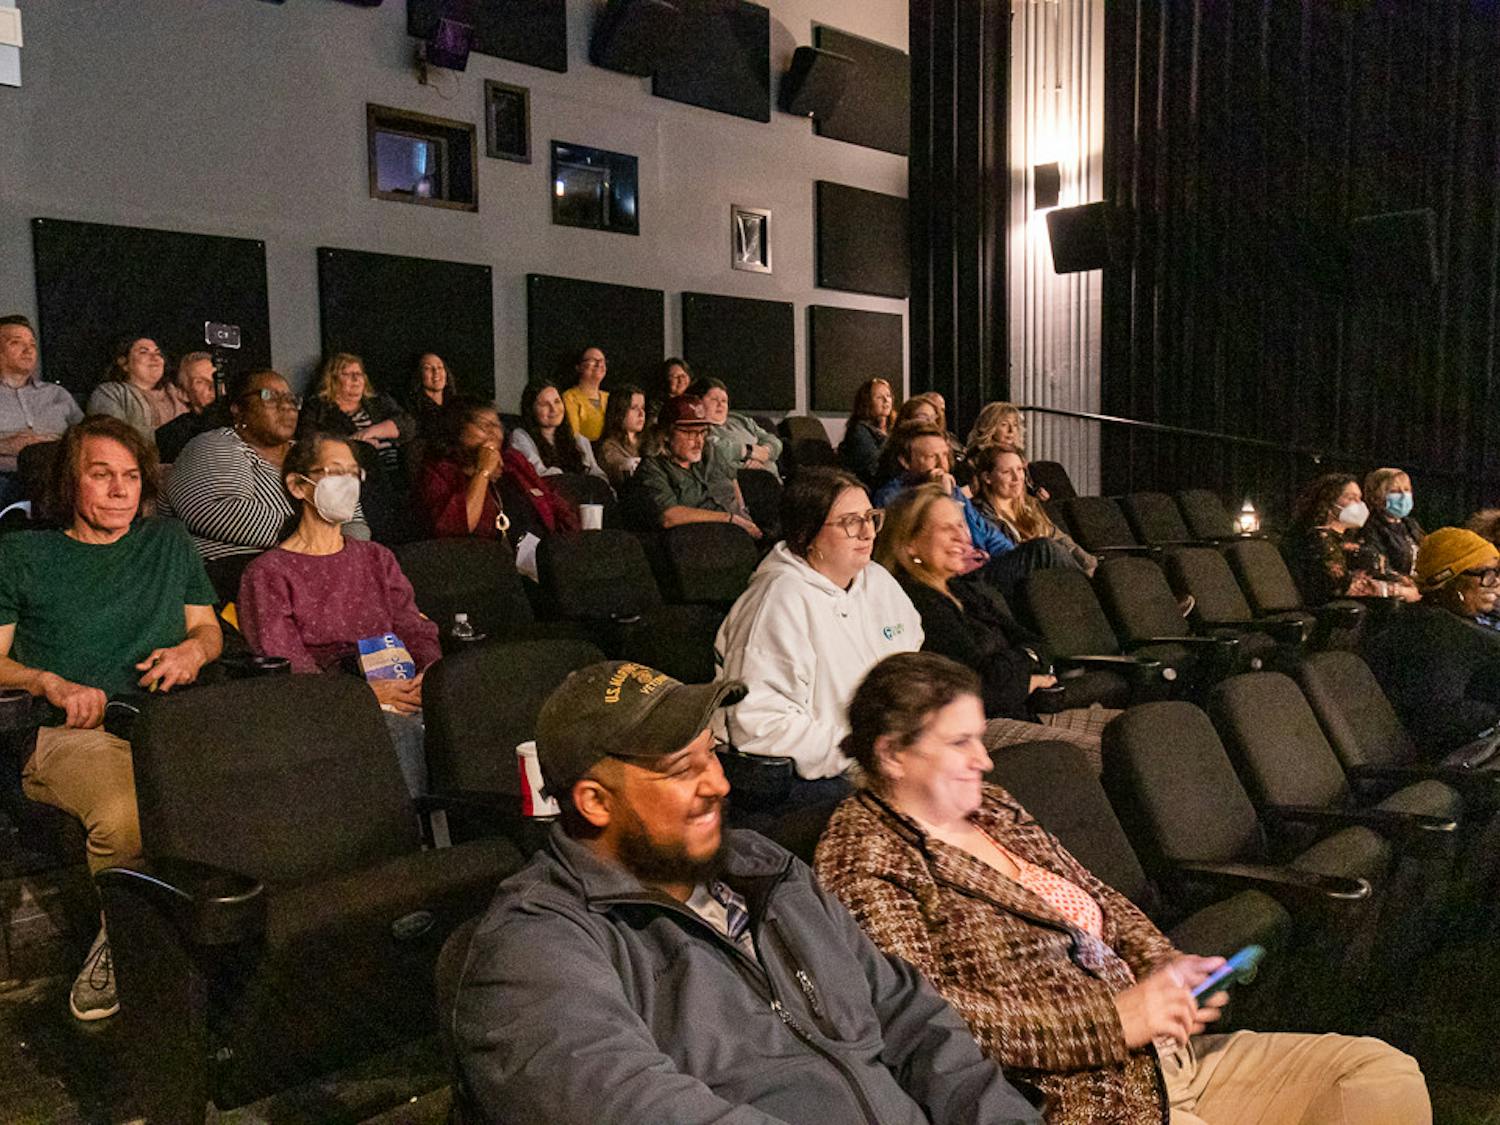 Members of the crowd listen as panelists discuss the importance and proper use of Narcan after the screening of "Love in the Time of Fentanyl" at Nickelodeon Theater on Jan. 25, 2023. Narcan, the name brand of Naloxone, is used to reverse the effects of opioid overdose. It can be prescribed by any pharmacist in South Carolina and can be picked up from community distributors across the state, which can be found at wakeupcarolina.org.